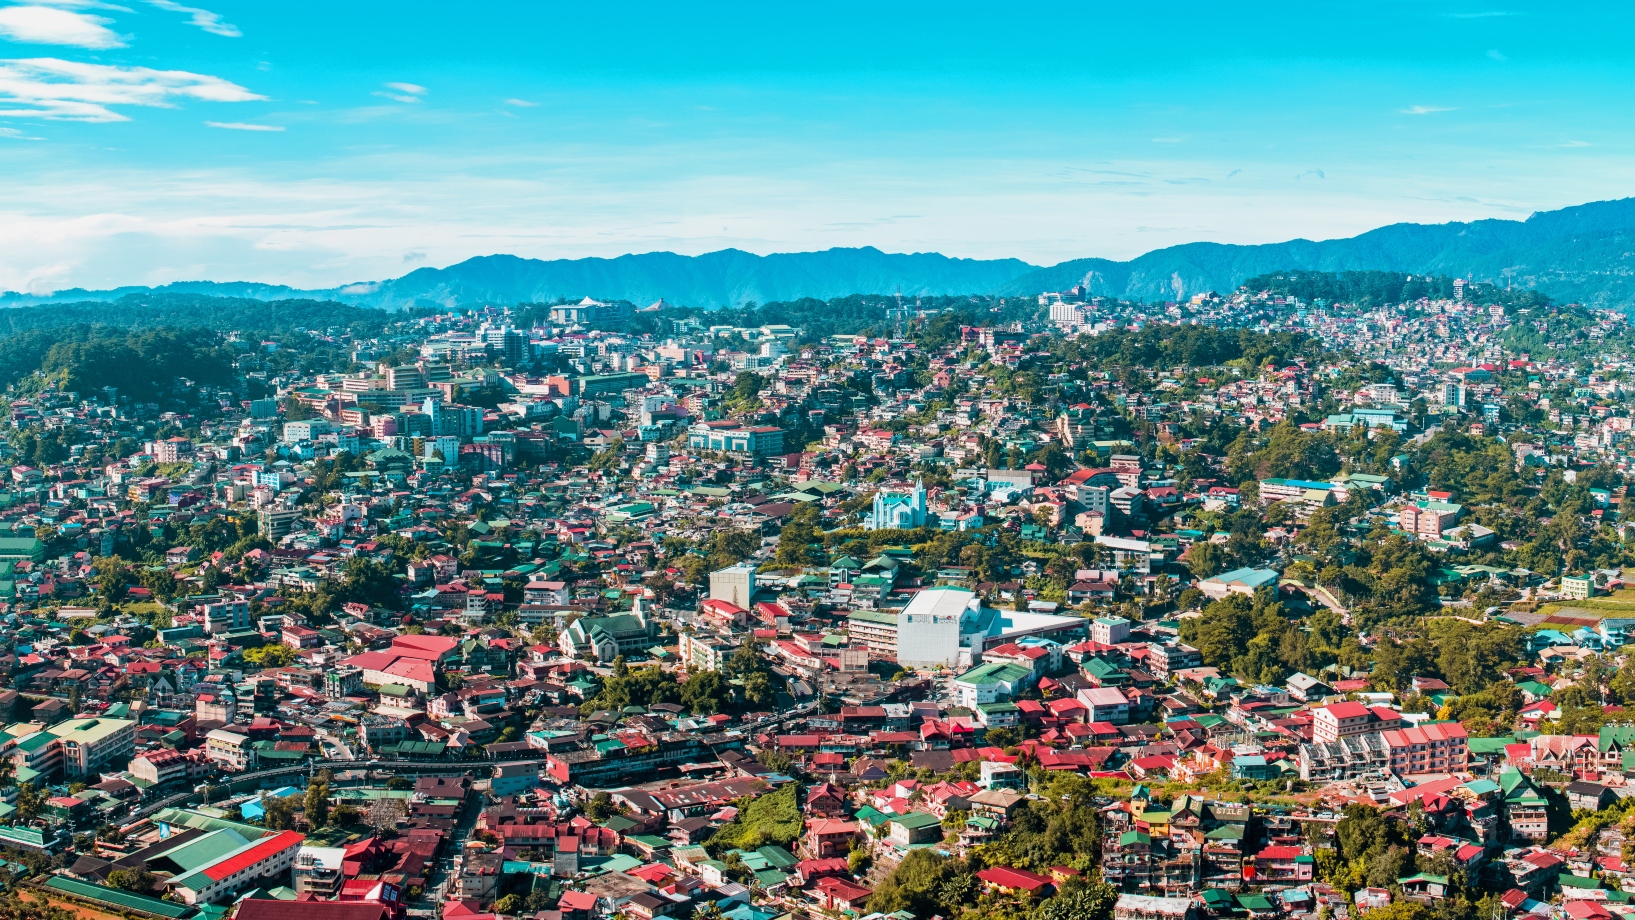 Baguio affordable city philippines